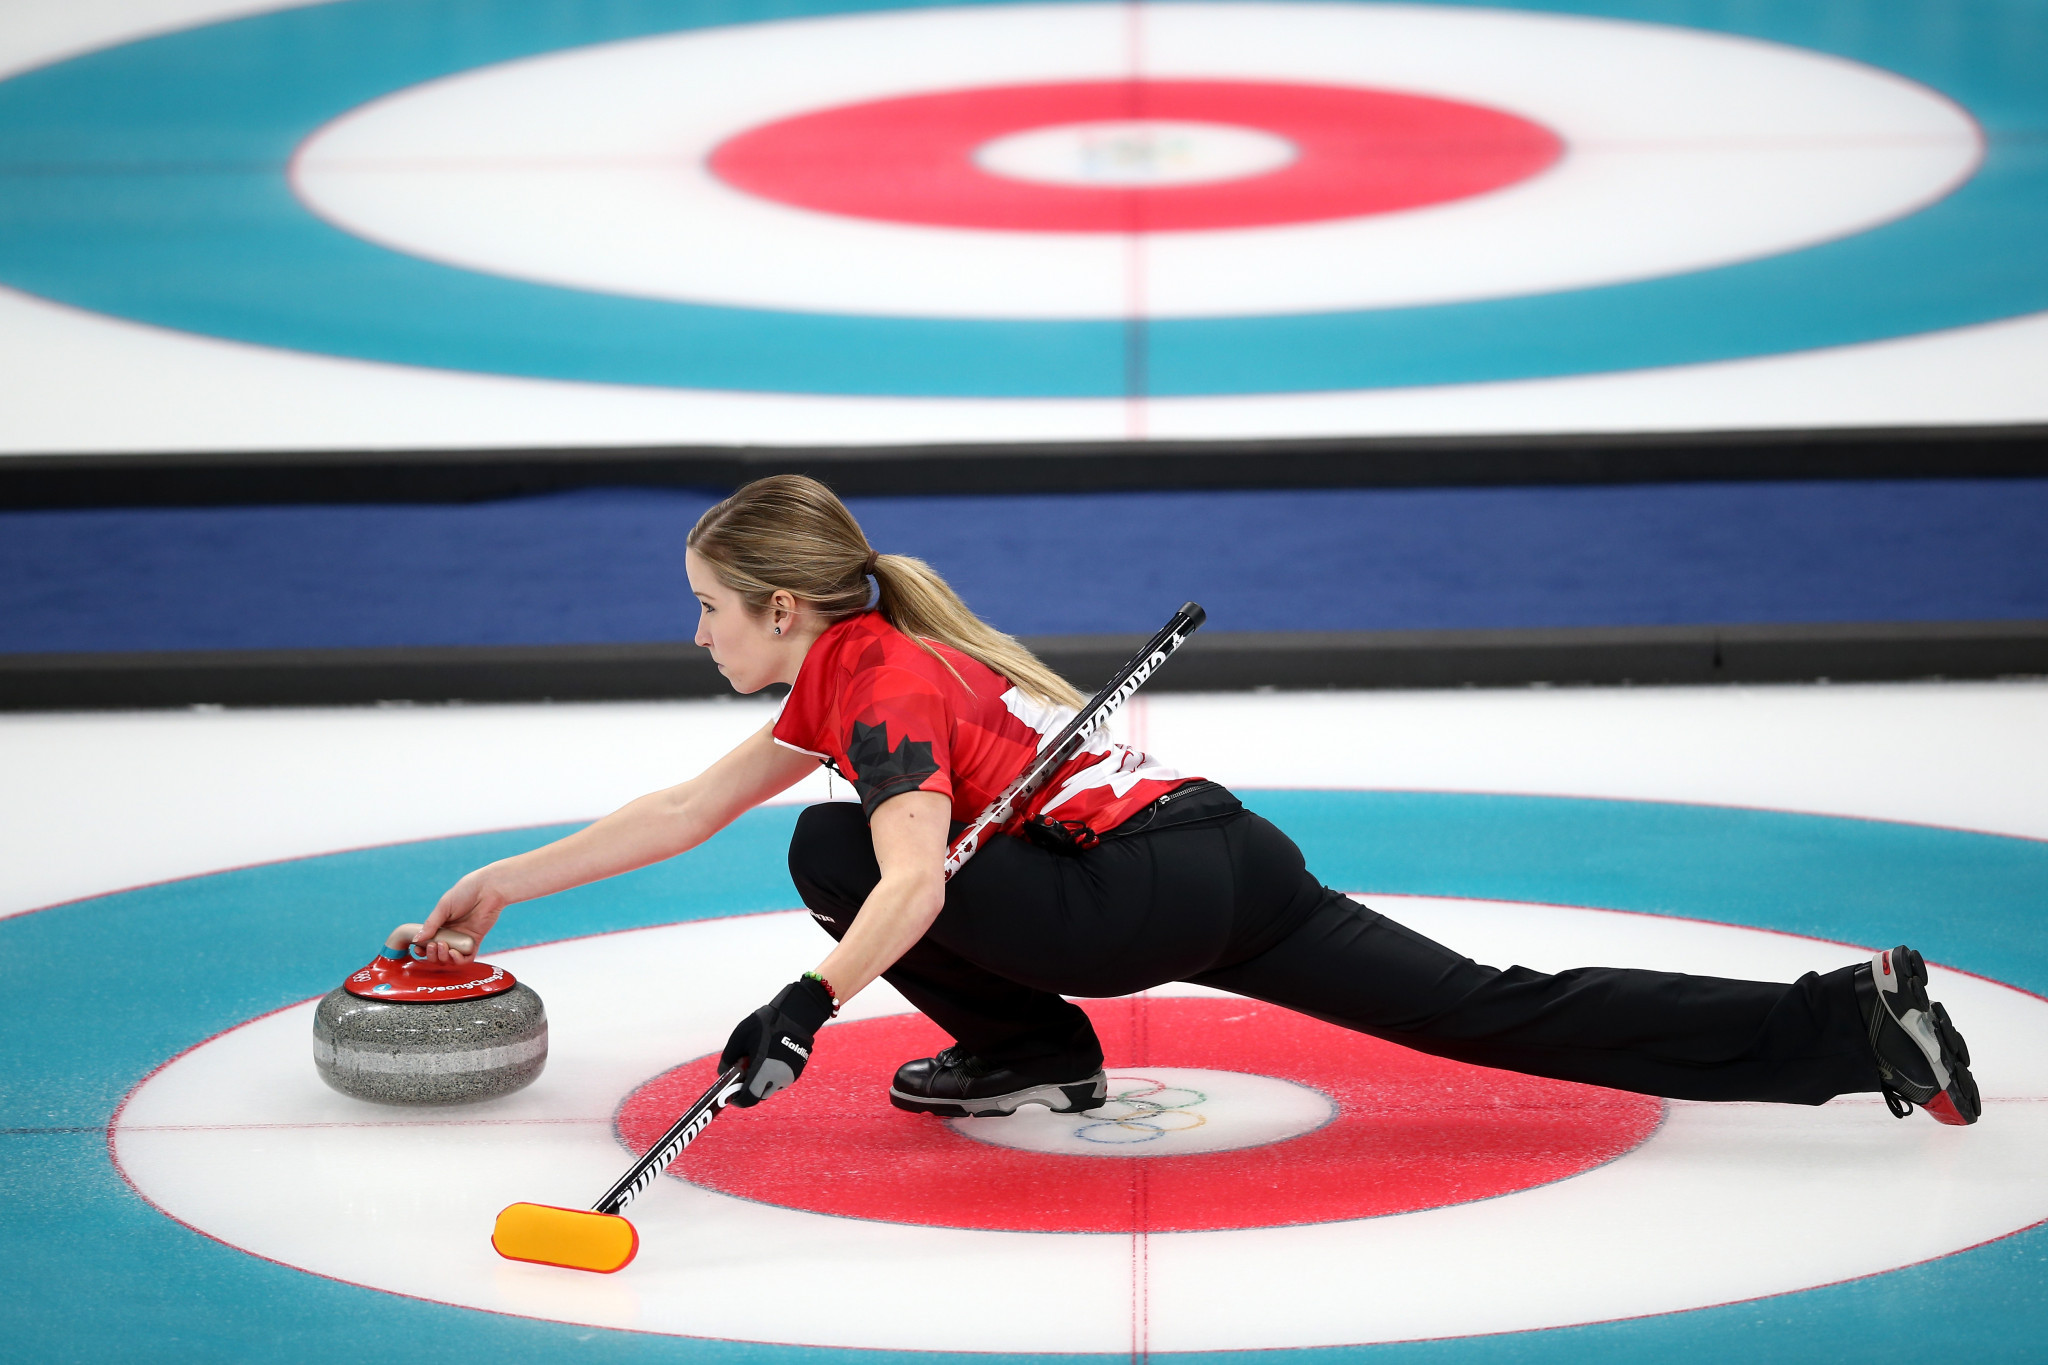 Canada thrash Switzerland to clinch first Olympic mixed doubles curling gold medal at Pyeongchang 2018